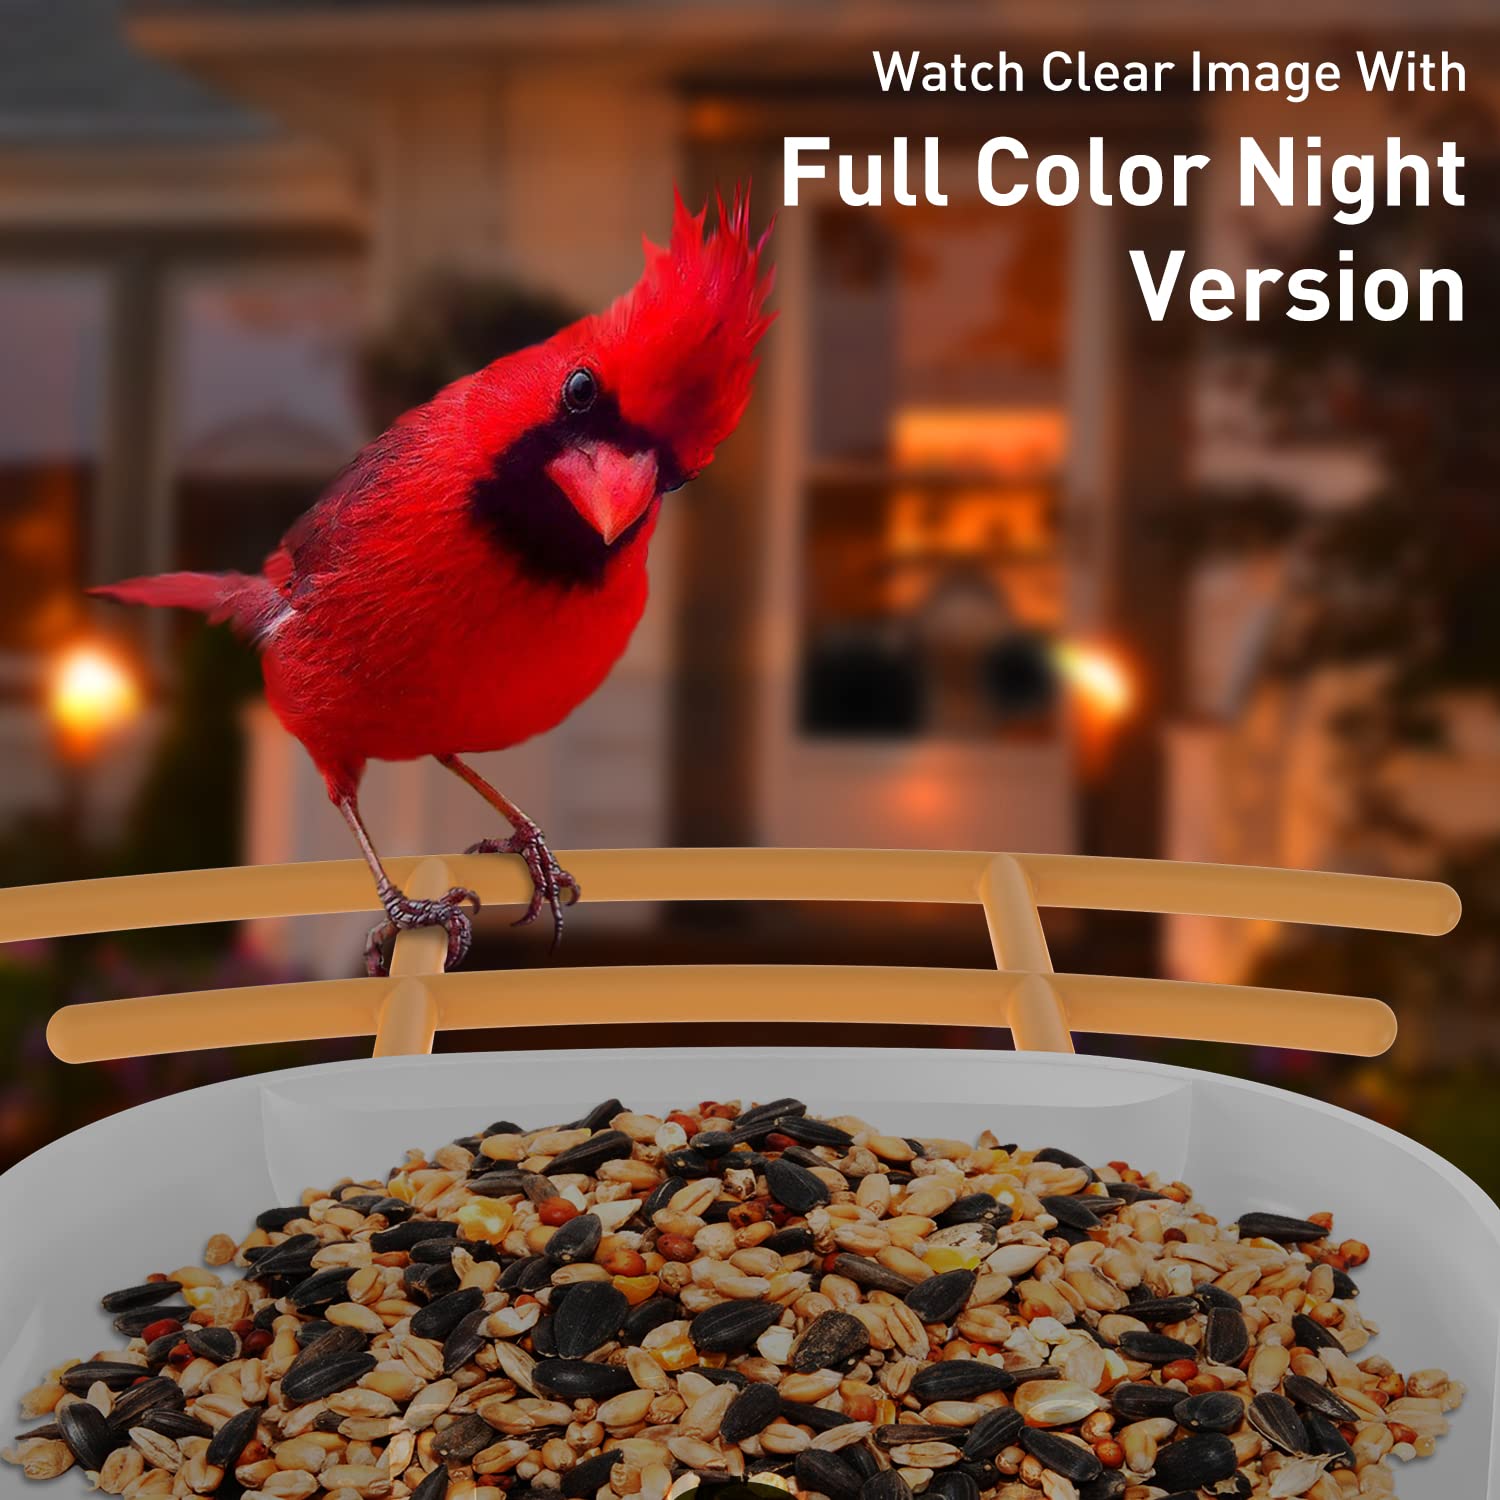 SOLIOM® BF09-Bird Feeder with Camera Wireless Outdoor,Auto Record Bird Video, Instant Notifications, 5W Solar Panel and 32GB SD Card